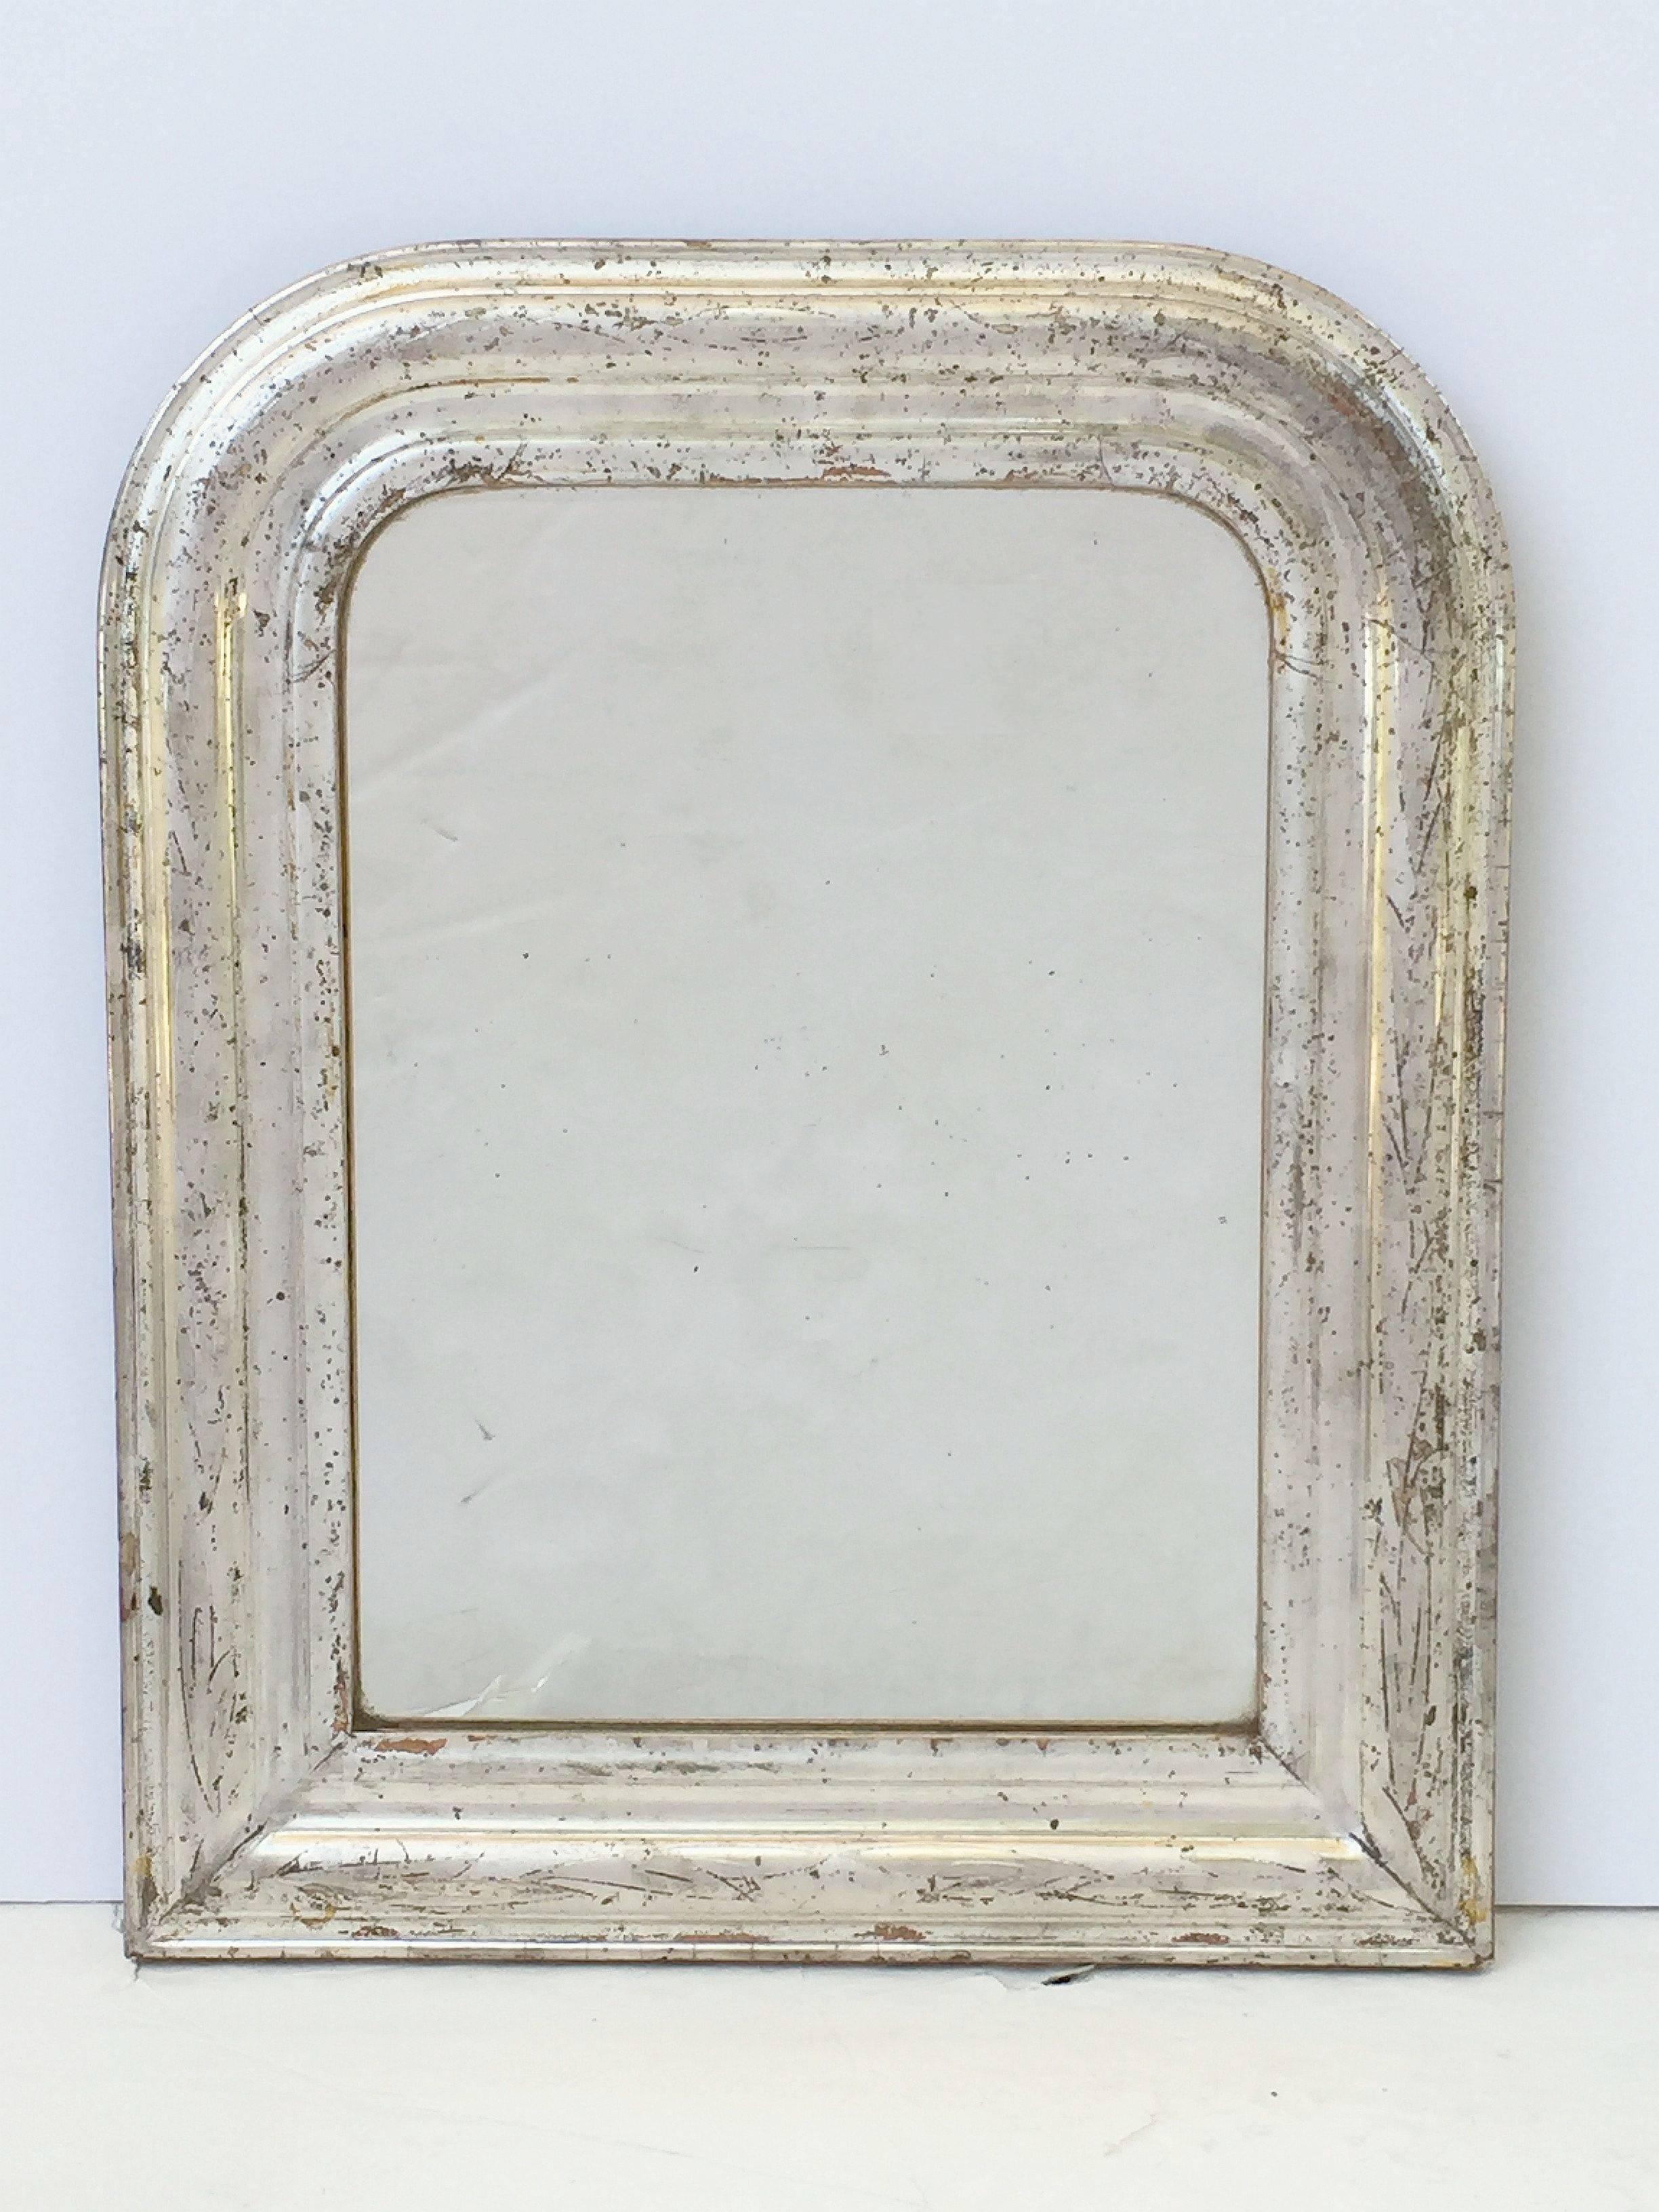 A handsome Louis Philippe wall mirror featuring a moulded surround and an etched foliate design showing through silver-leaf.

Dimensions: H 19 inches x W 15 1/2 inches

Other sizes available in this style.